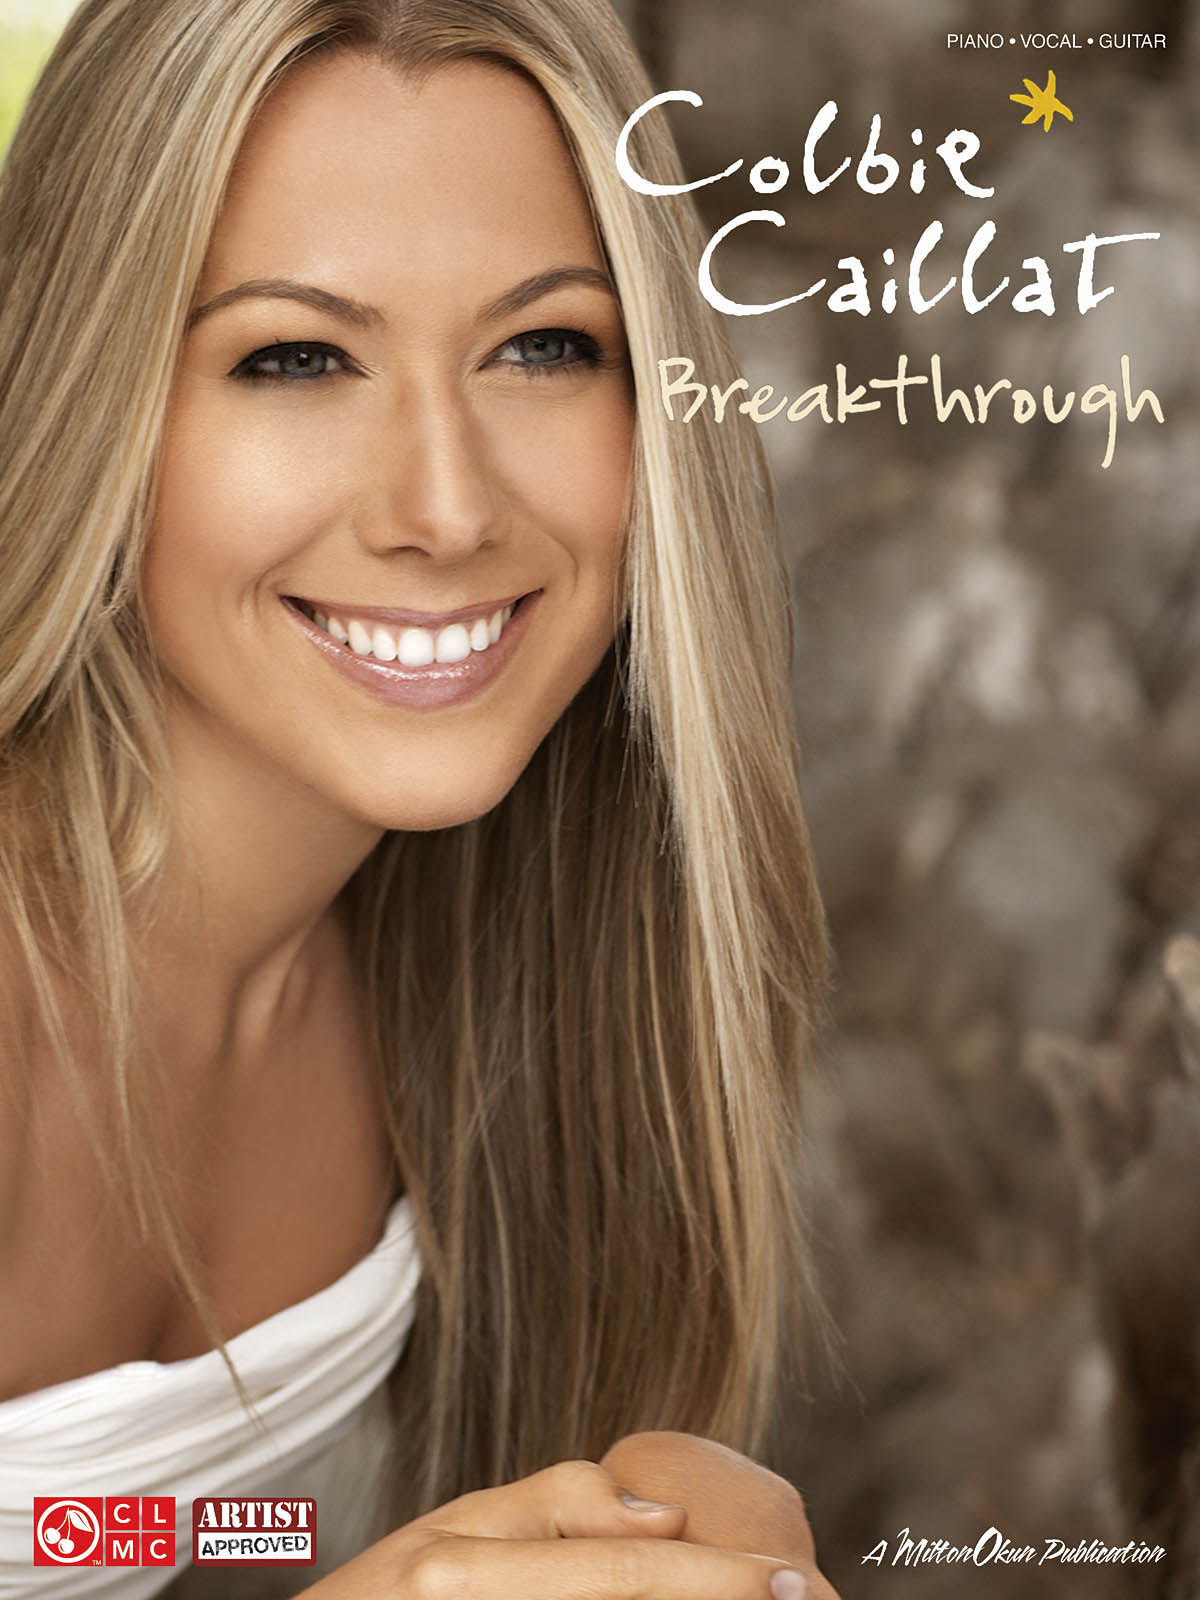 Colbie Caillat: Colbie Caillat - Breakthrough: Piano  Vocal and Guitar: Album